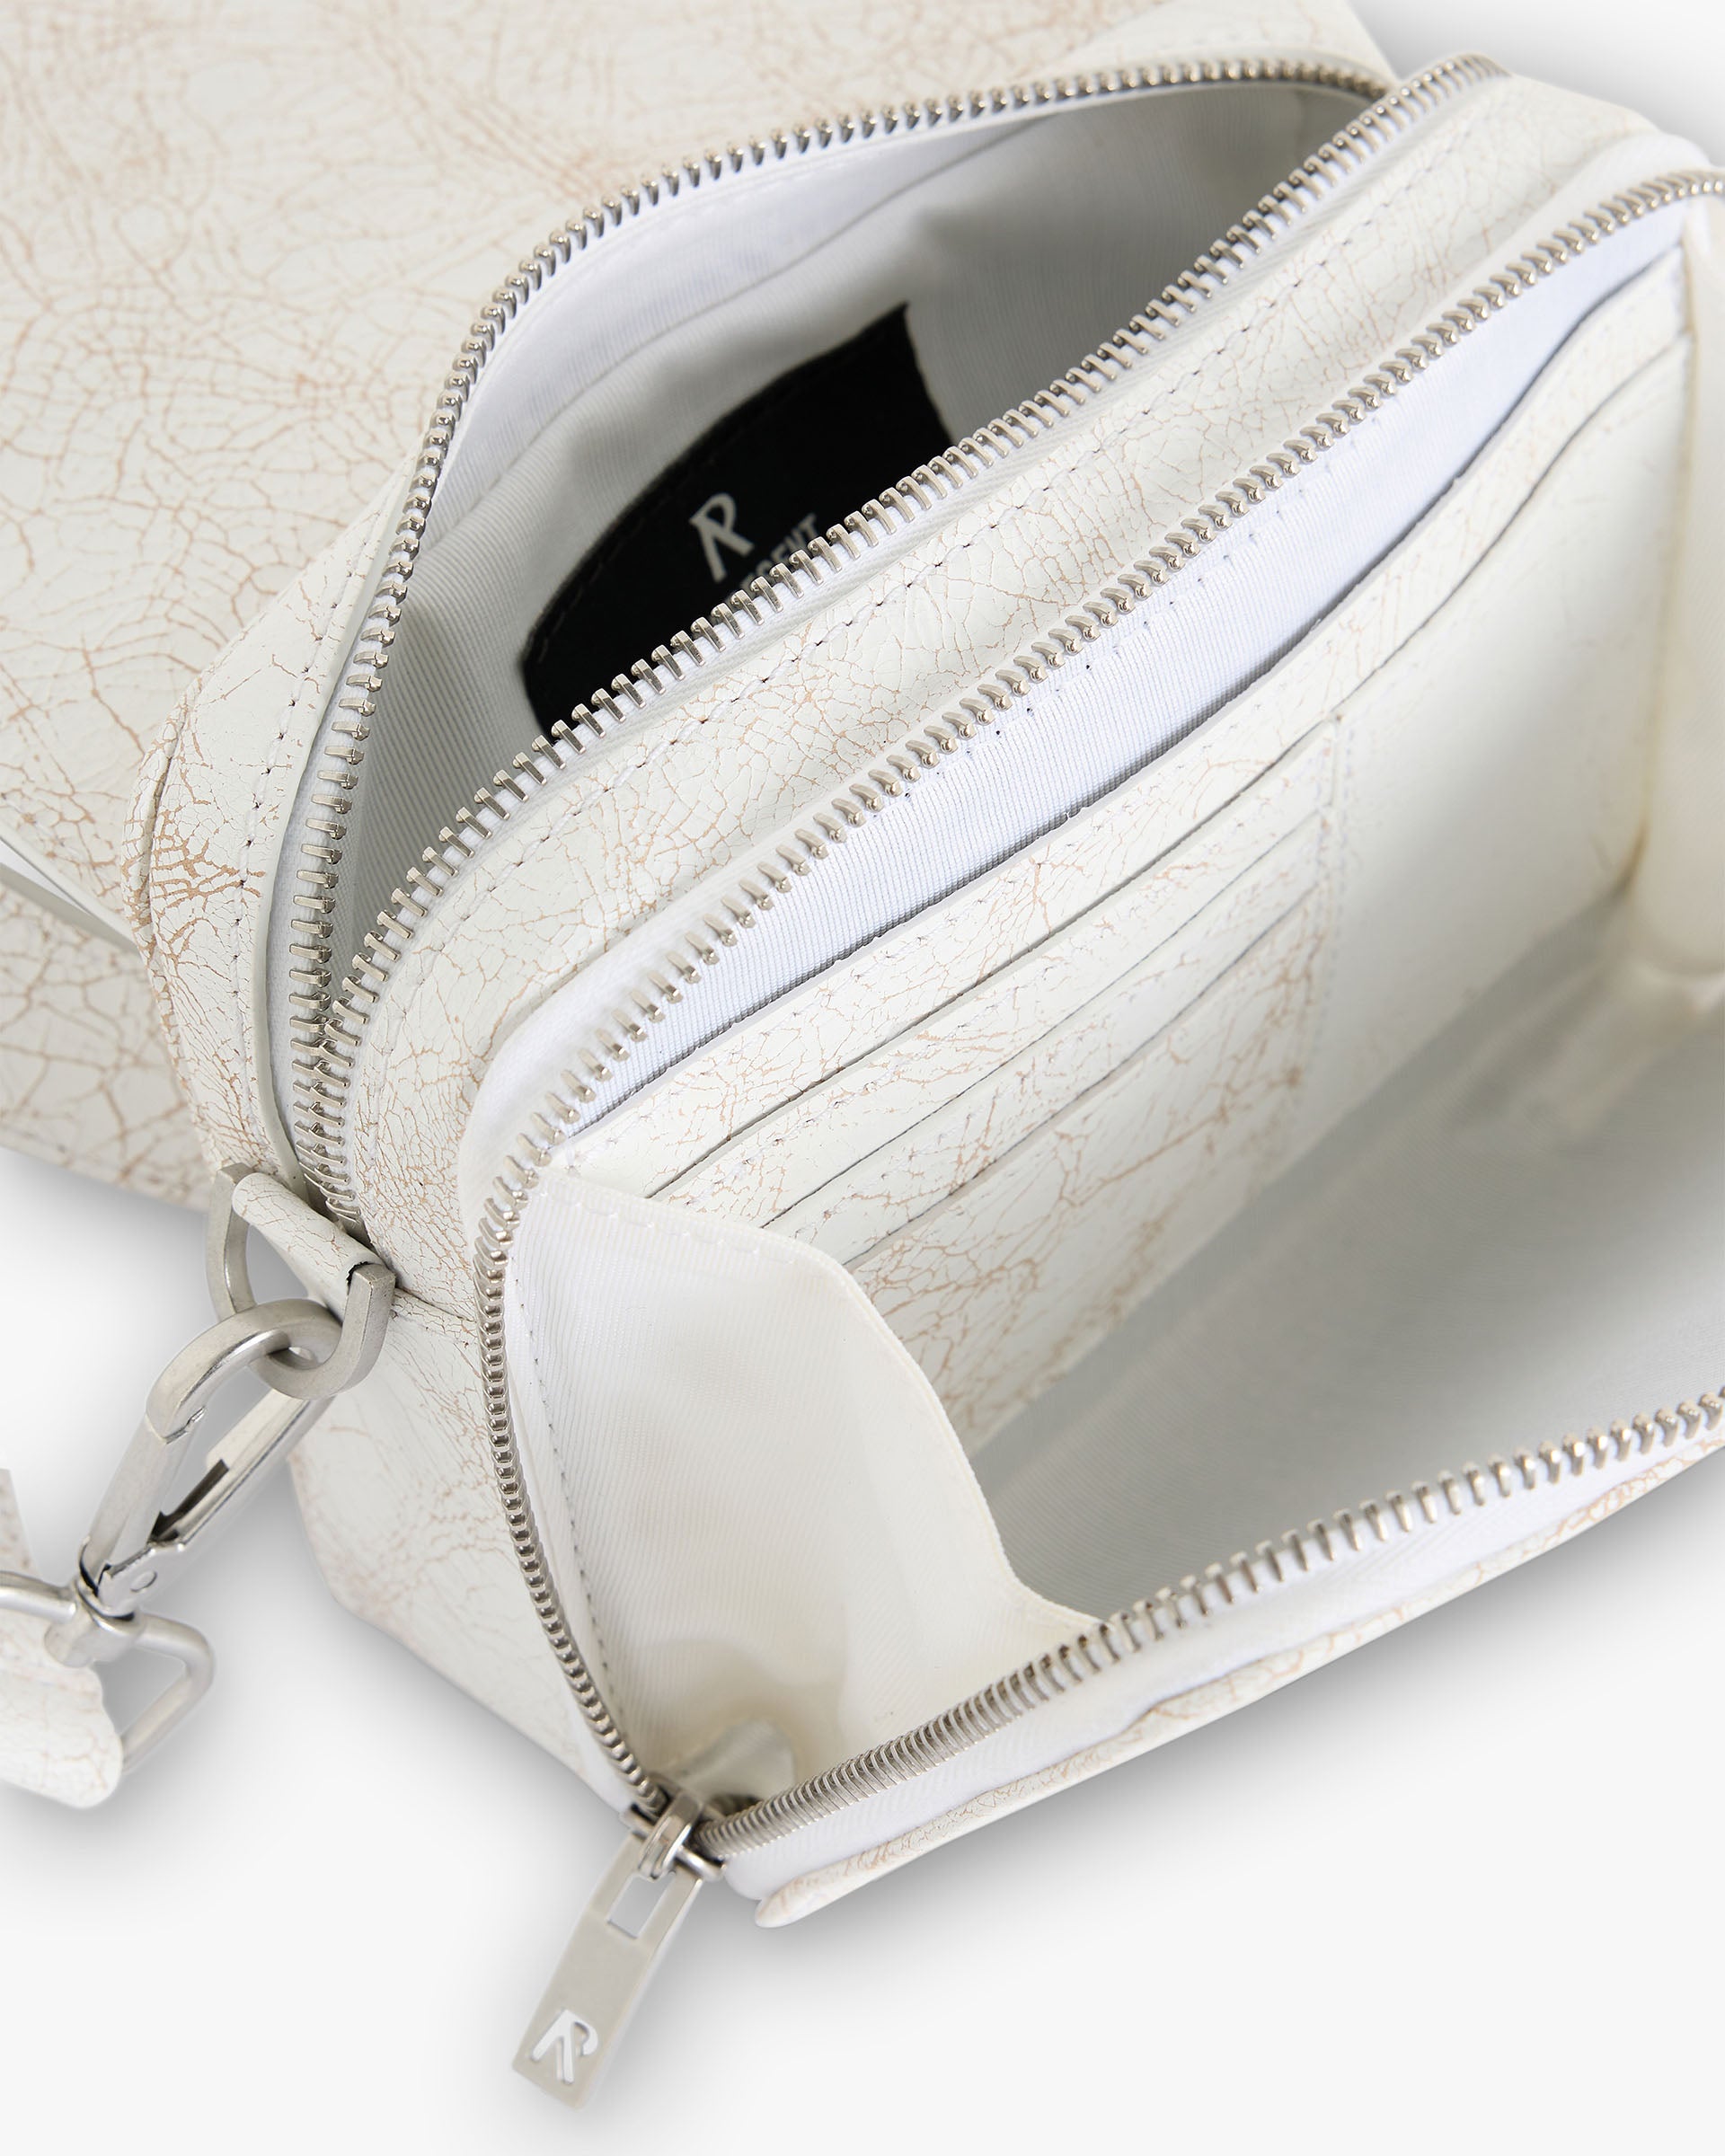 Cracked Leather Cross Body Bag - Antique White